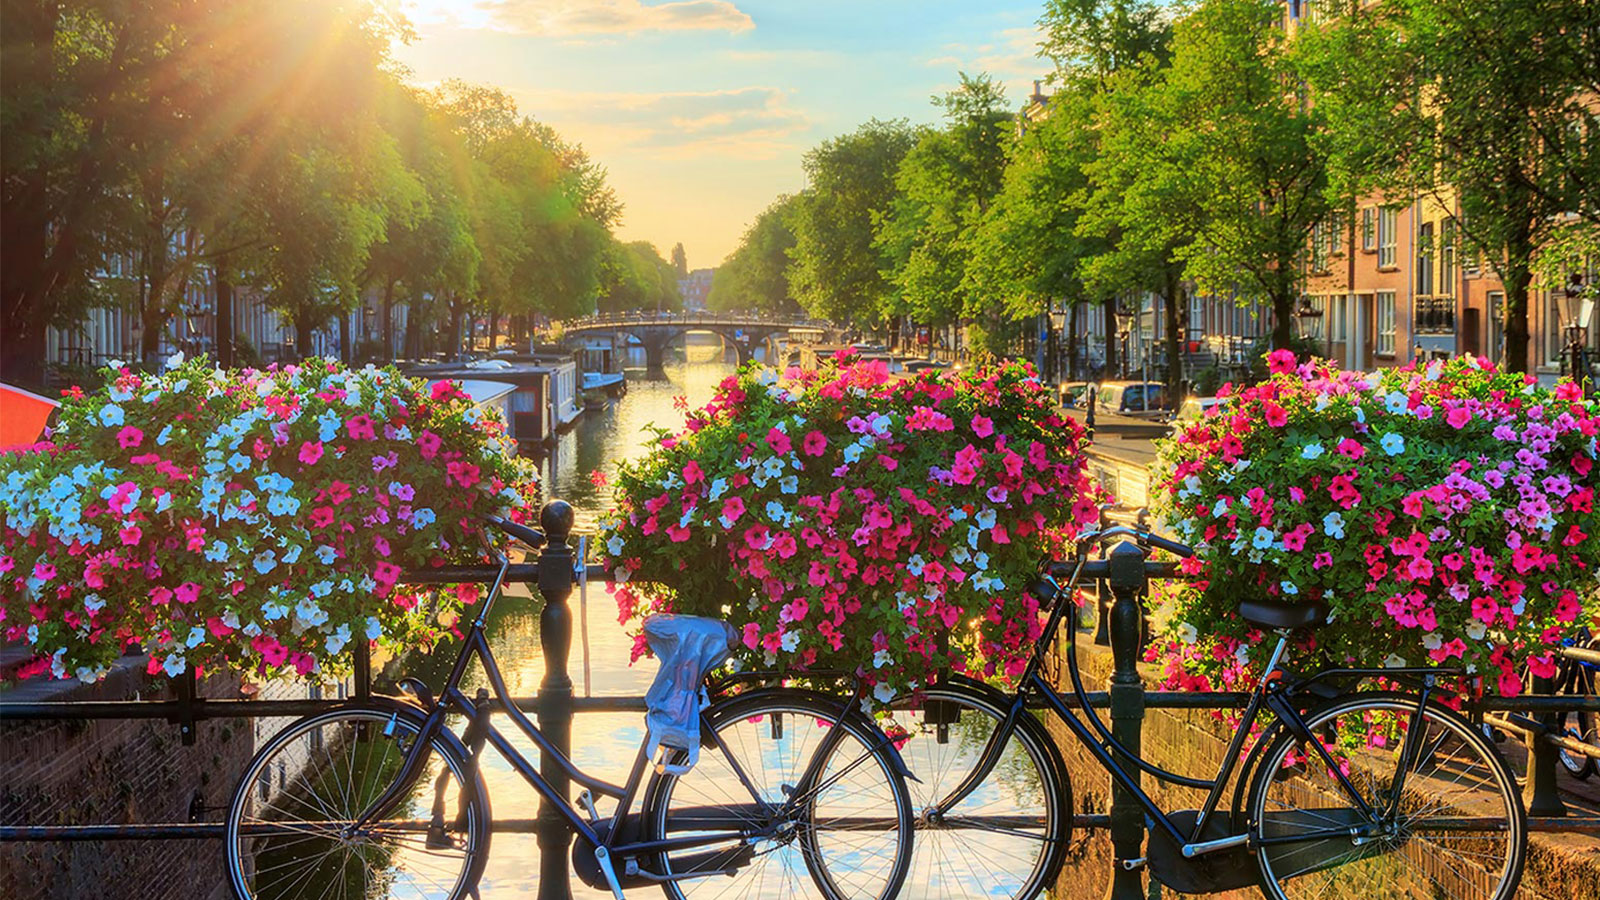 Amsterdam looking with flowers and a bicycle